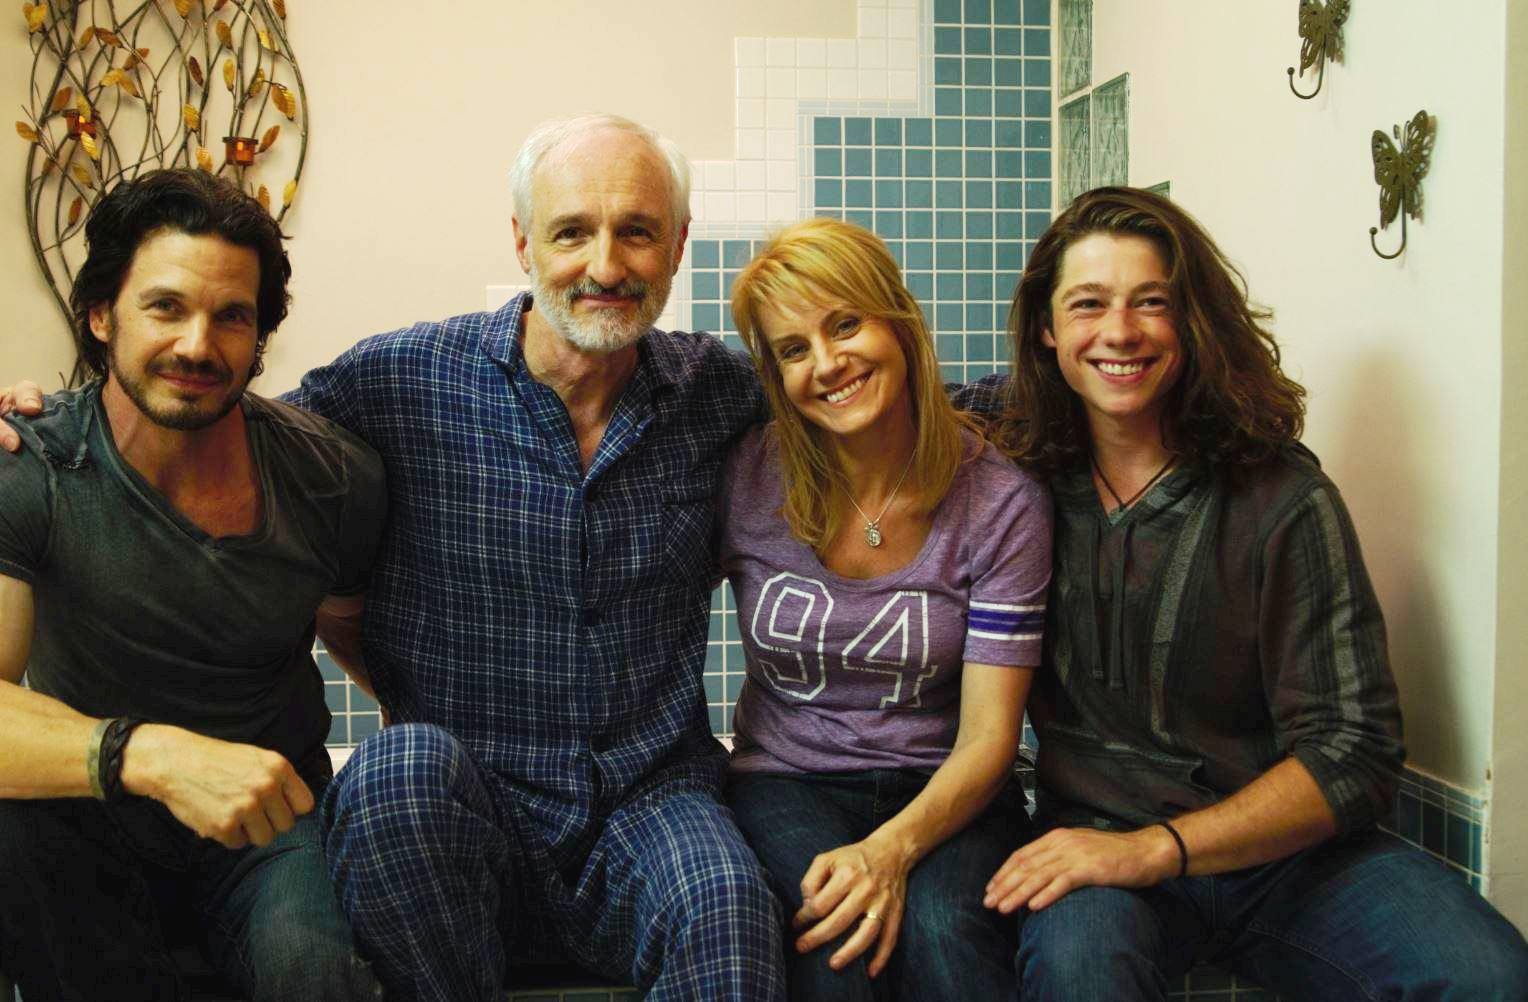 Michael Worth, Michael Gross, Eileen Grubba and David Topp. The cast of 